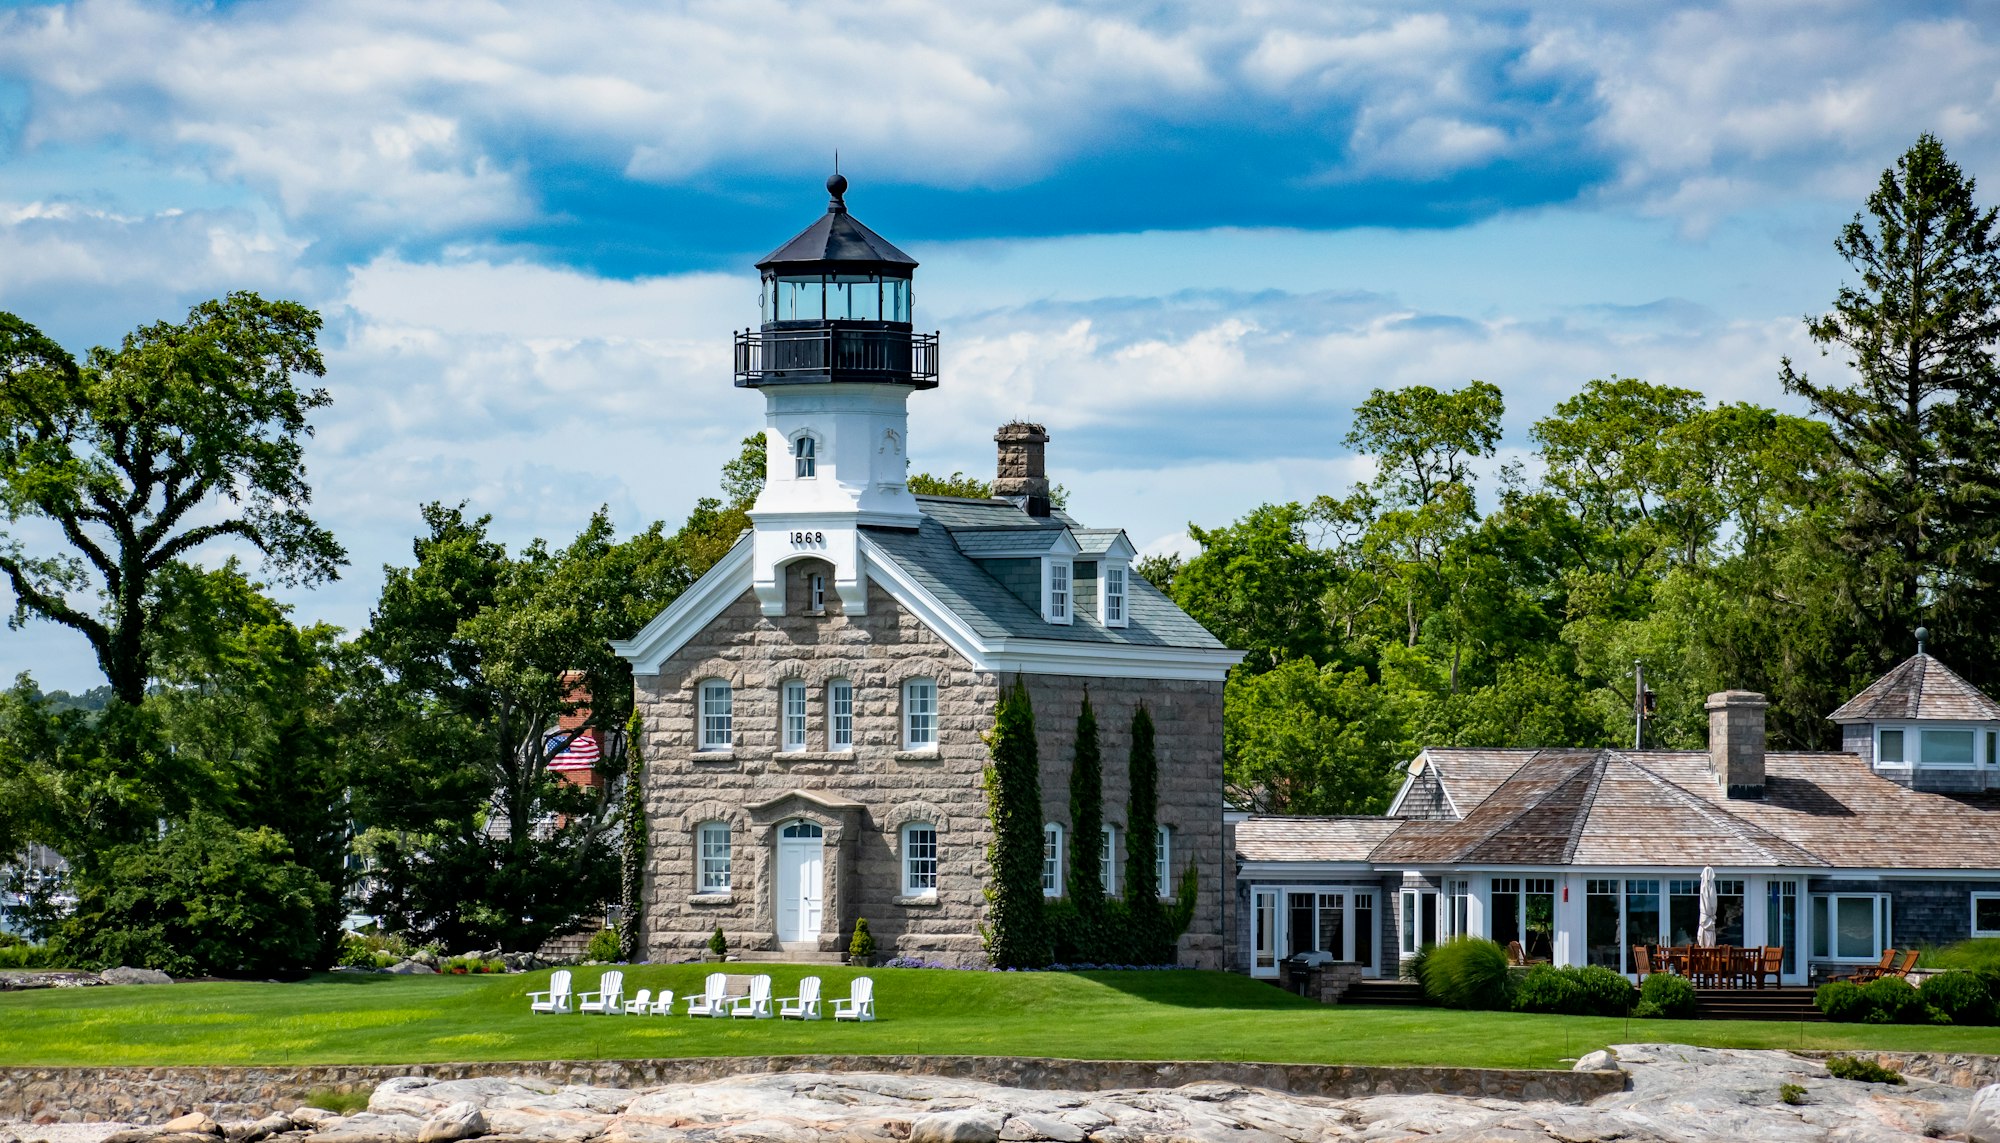 Morgan Point Light . . . This lighthouse is situated at the mouth of Mystic River as it empties into Fisher Island Sound.  It is located in far southeastern Connecticut, where Rhode Island and New York waters begin to merge with the Connecticut border.